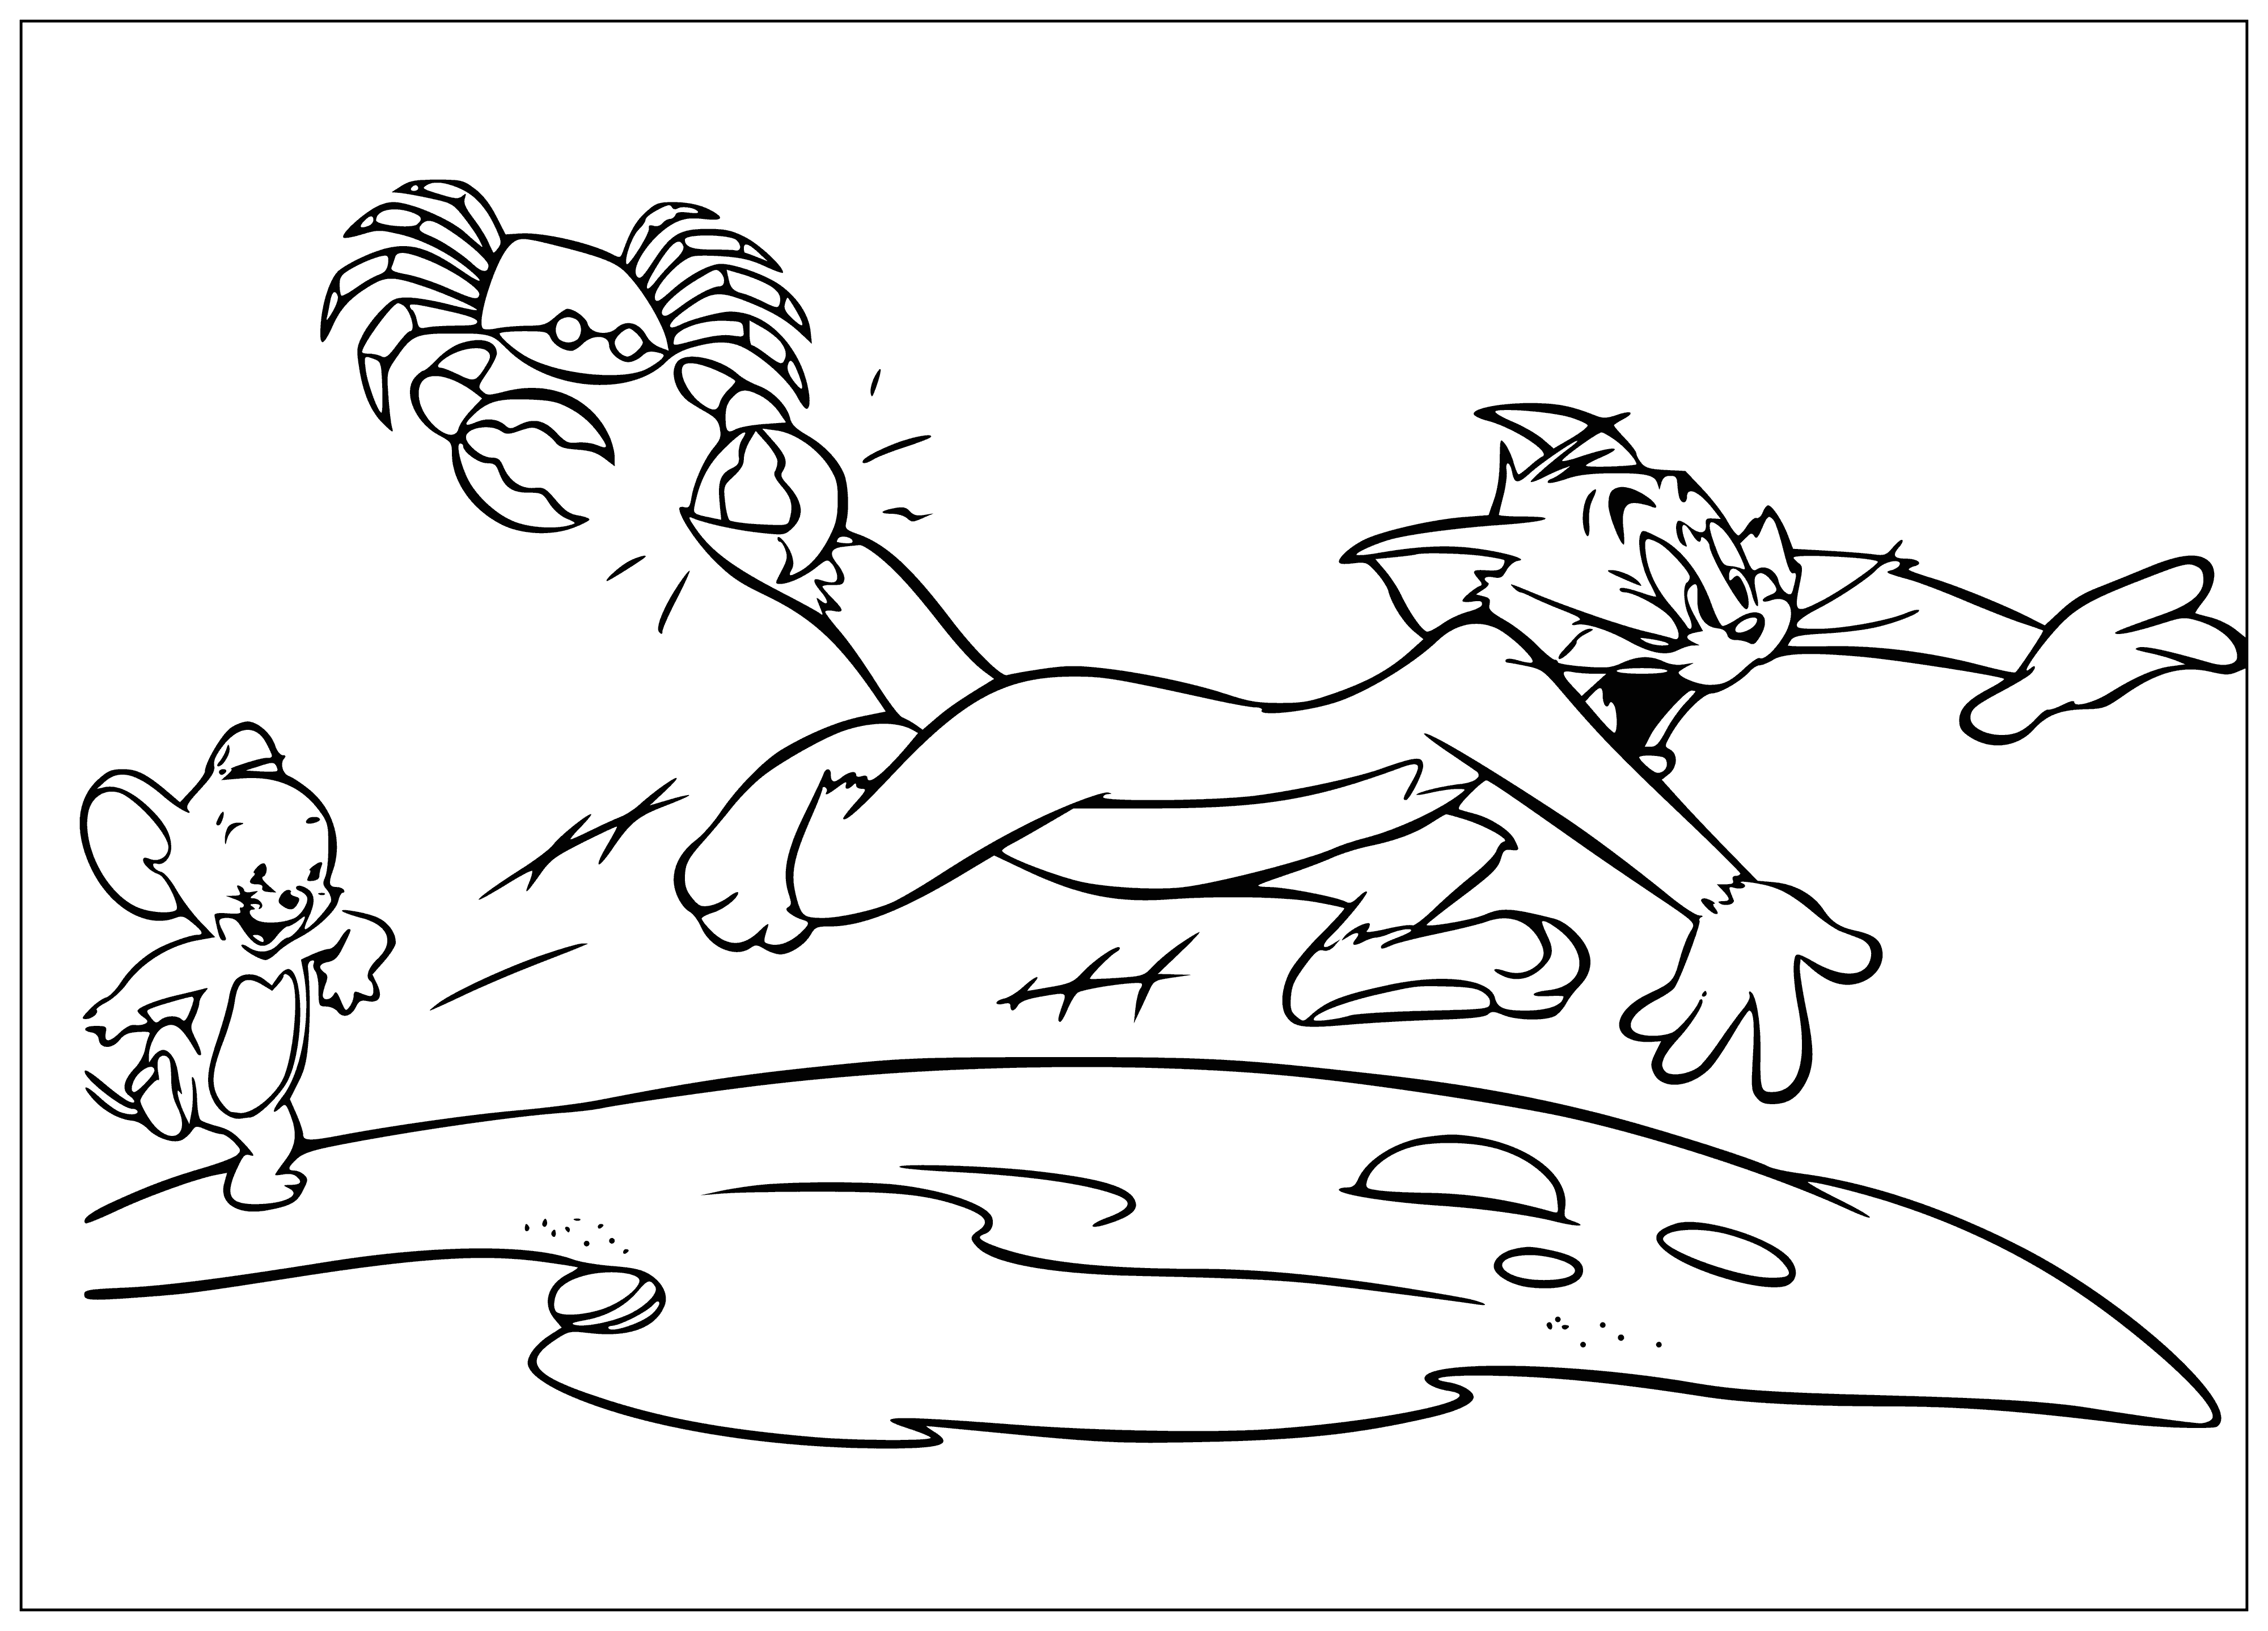 coloring page: Tom chases Jerry, who is laughing while running away, while Tom is angrily followed by a crab.